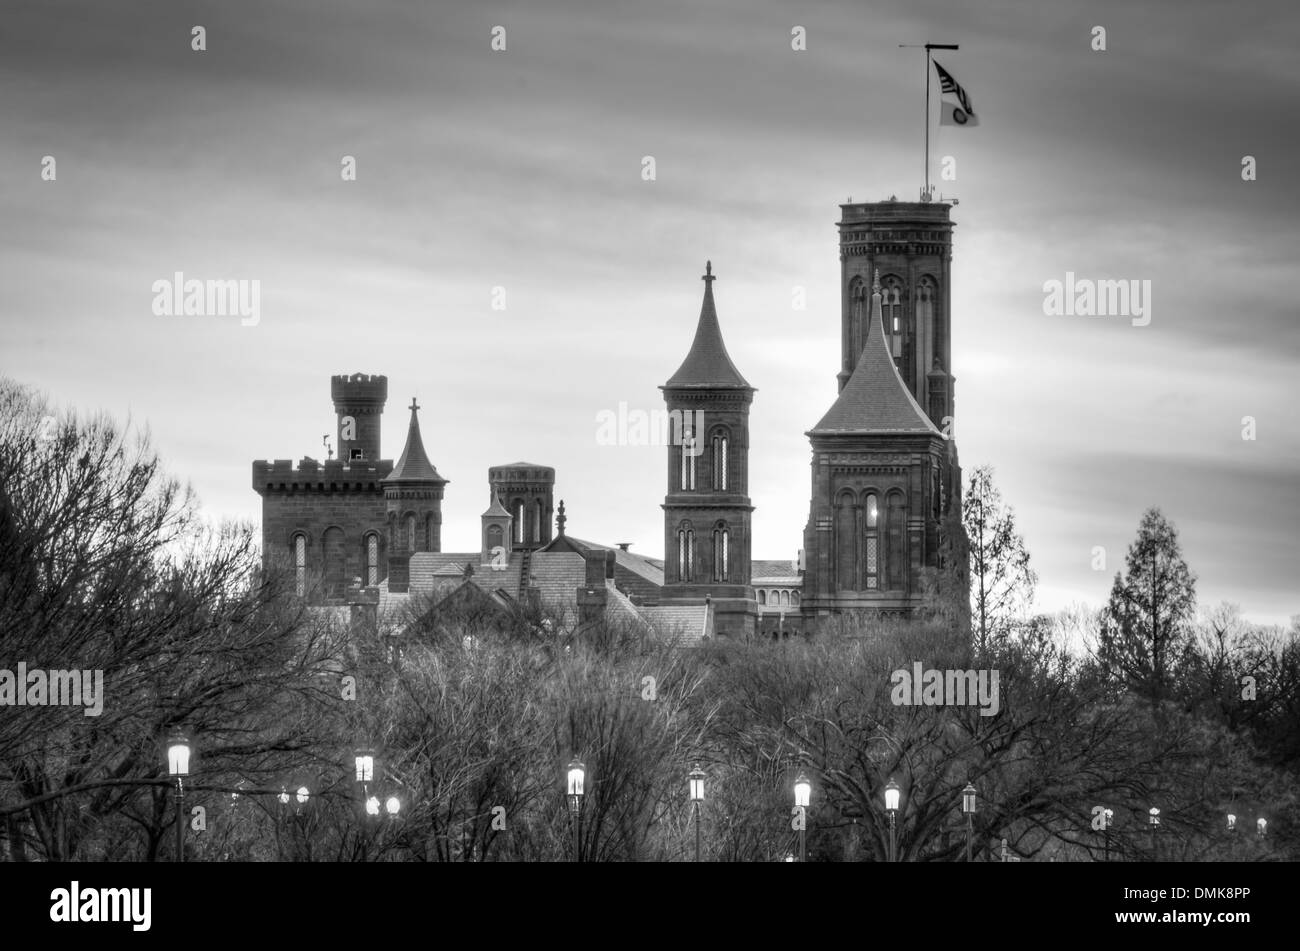 The Smithsonian Castle on the National Mall in Washington DC. For this and more, please see www.simoncrumpton.co.uk Stock Photo